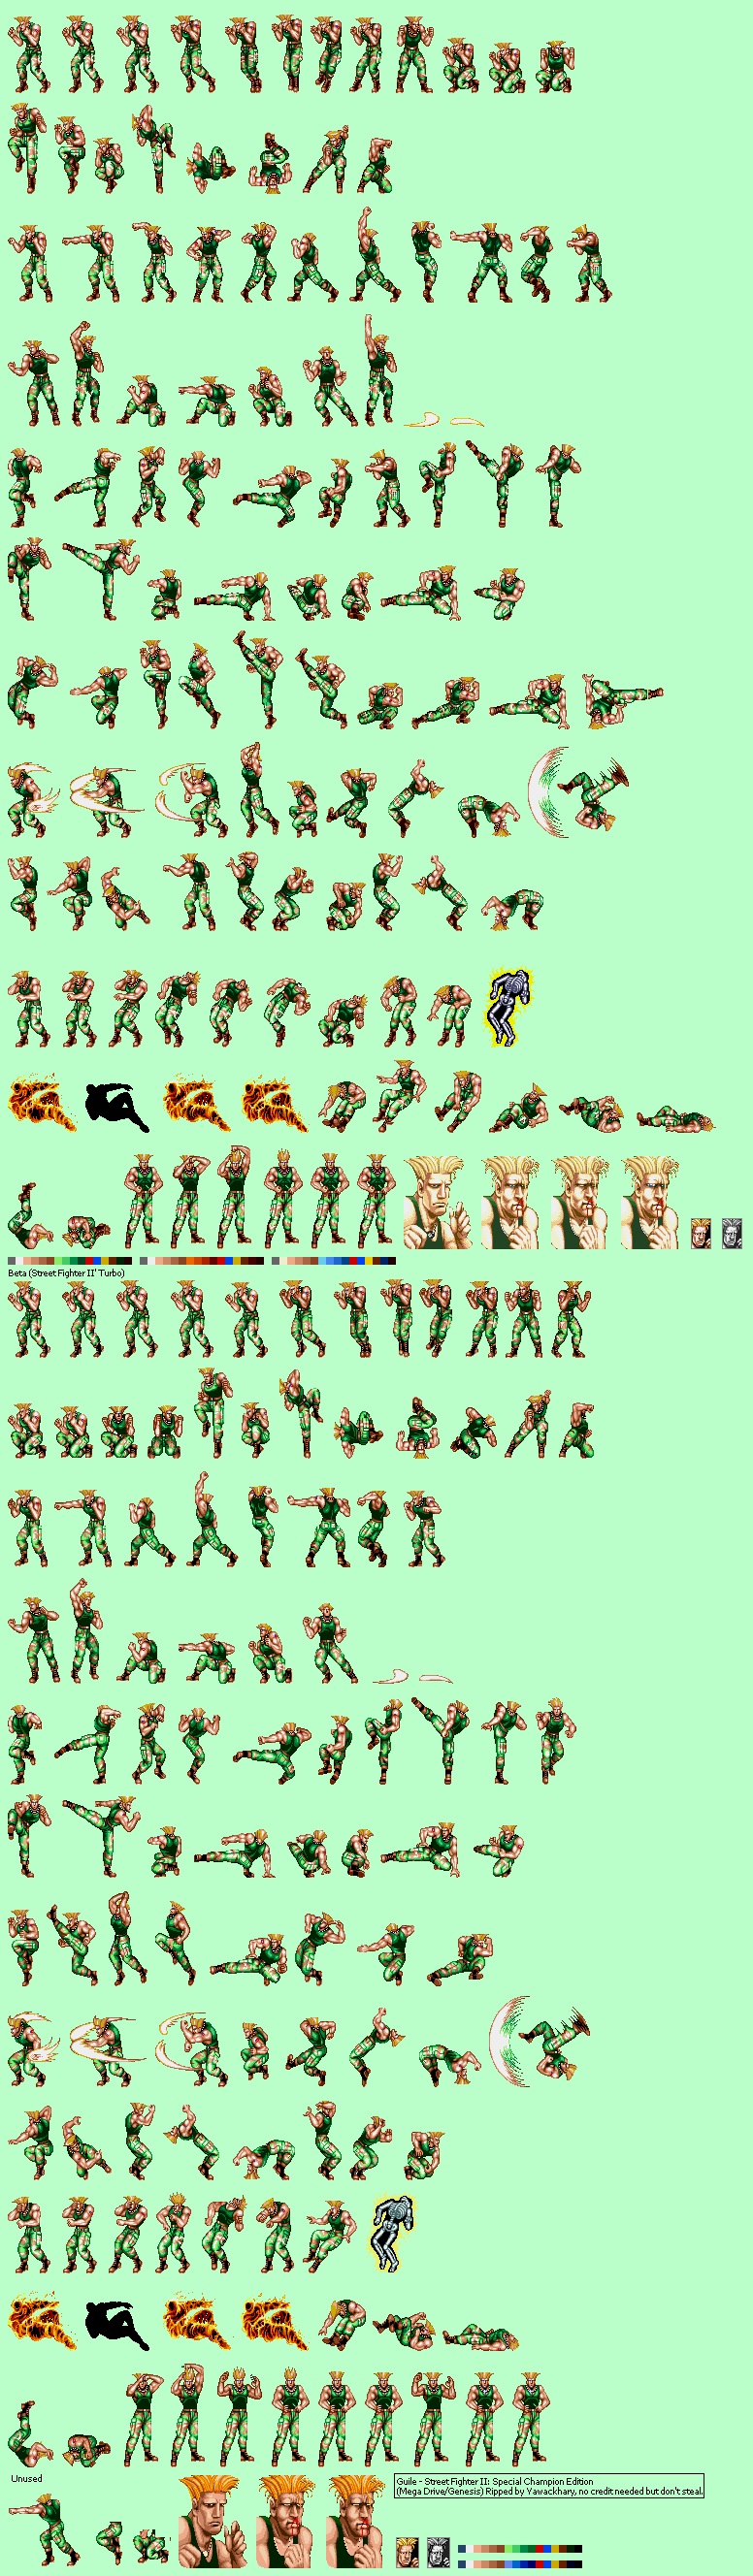 Street Fighter 2: Special Champion Edition - Guile